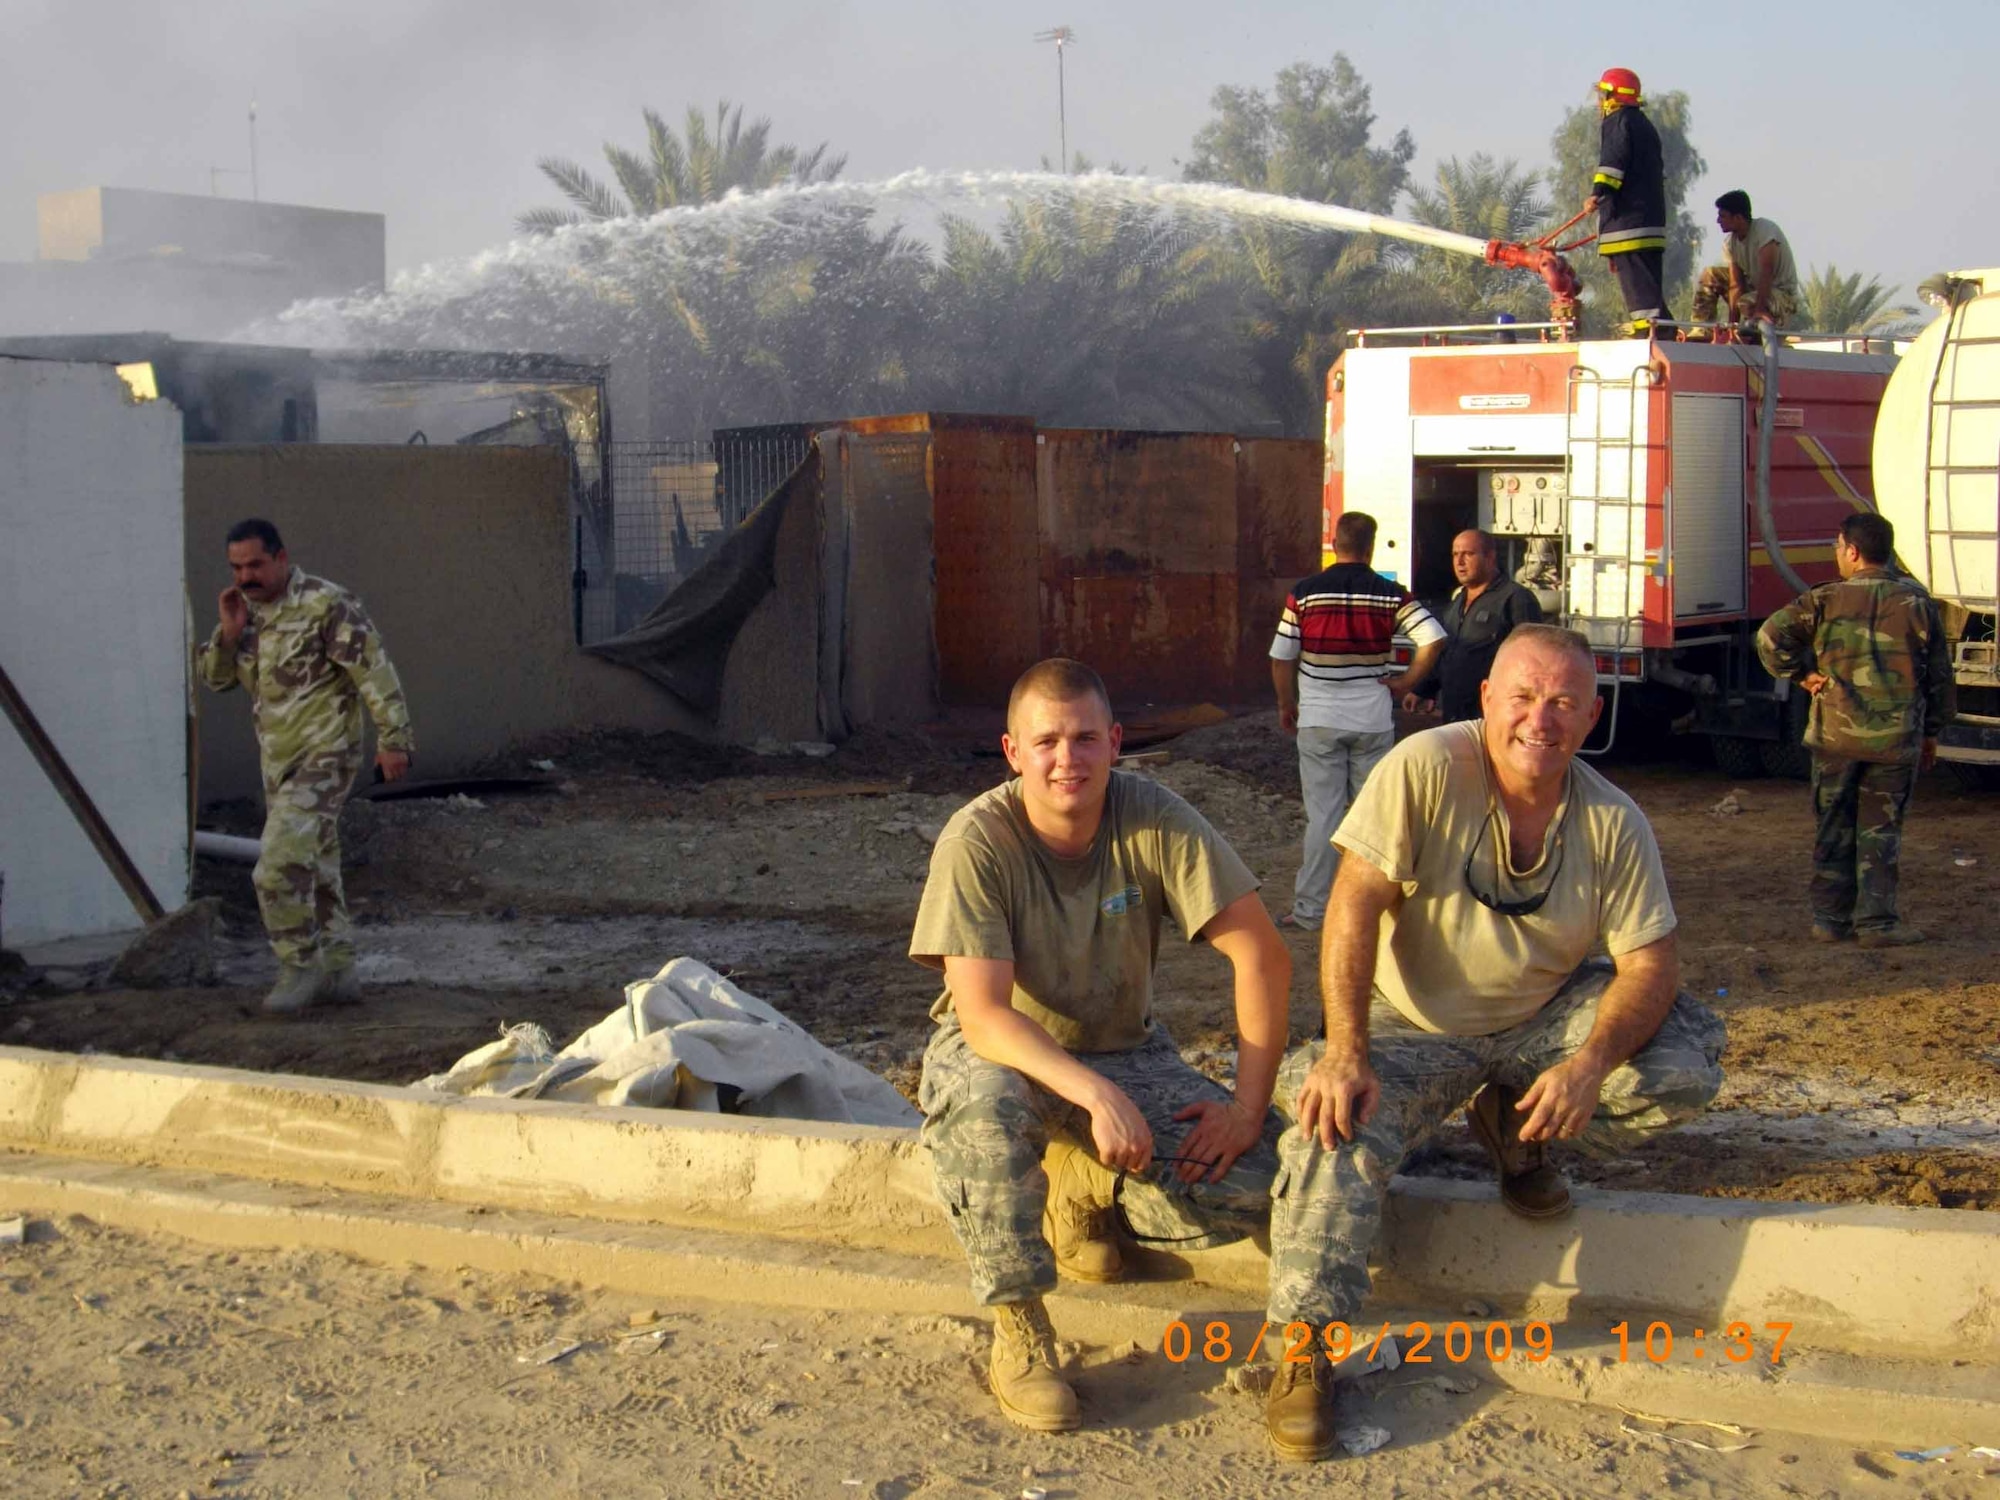 Senior Master Sgt. Judson Shull and Airman 1st Class Robert Bissett take a load off after fighting a fire in an Iraqi housing development  The two were off-base when a fire broke out in the nearby neighborhood.